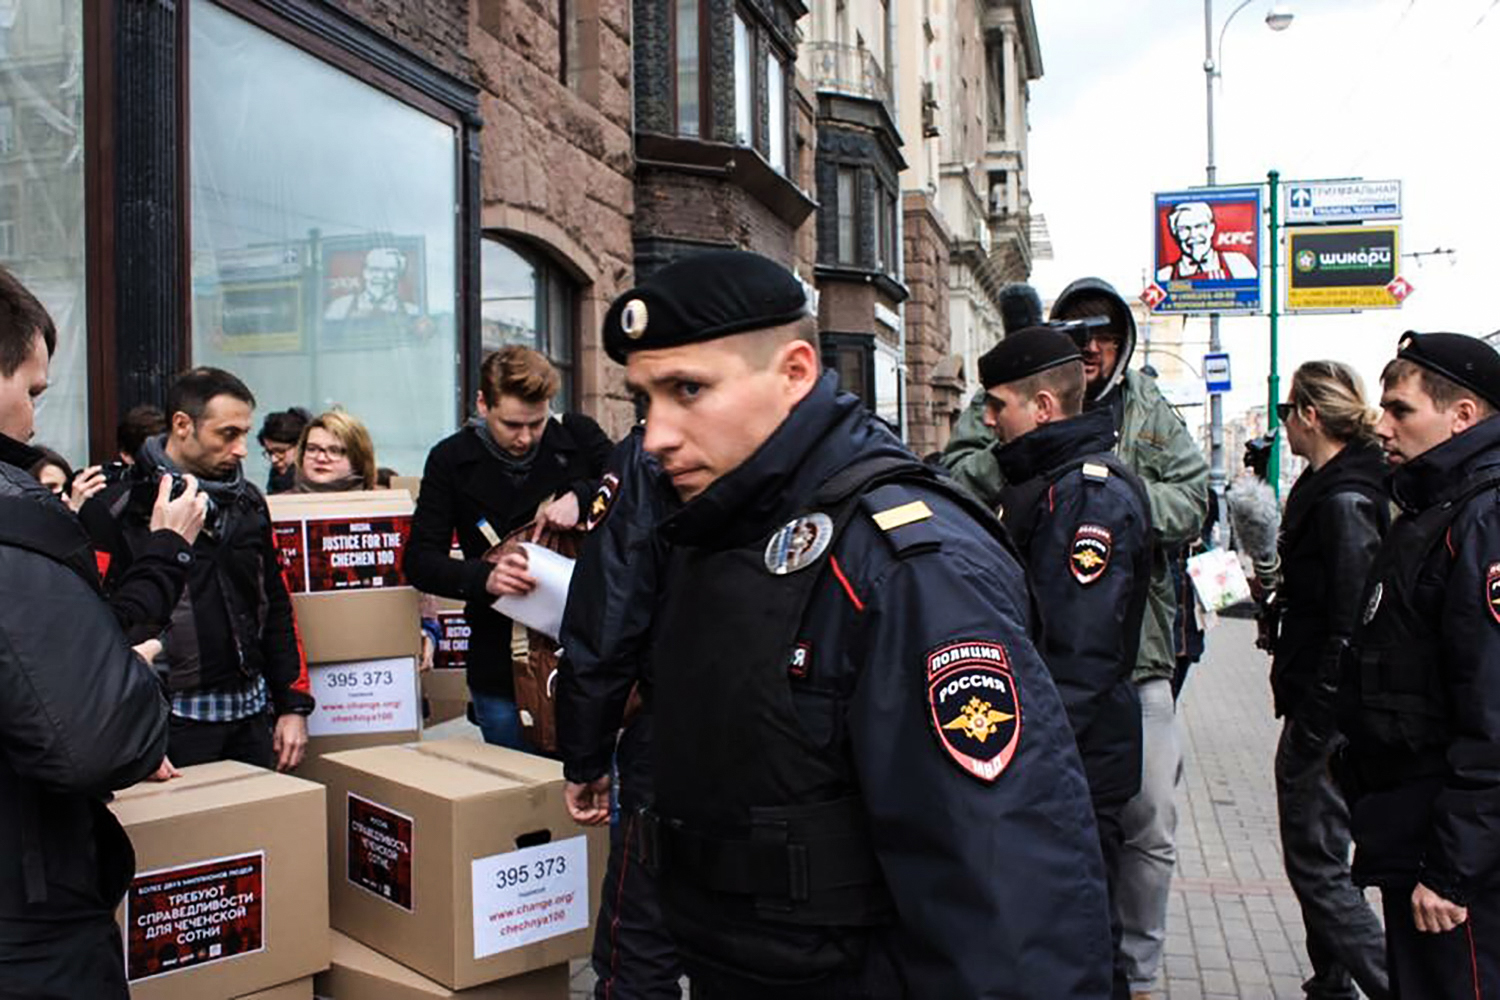 PHOTO: Russian policemen surround Russian gay-rights activists standing next to boxes allegedly containing signed petitions calling for a probe into a reported crackdown on Chechnya's LGBT community, during a rally in central Moscow on May 11, 2017.